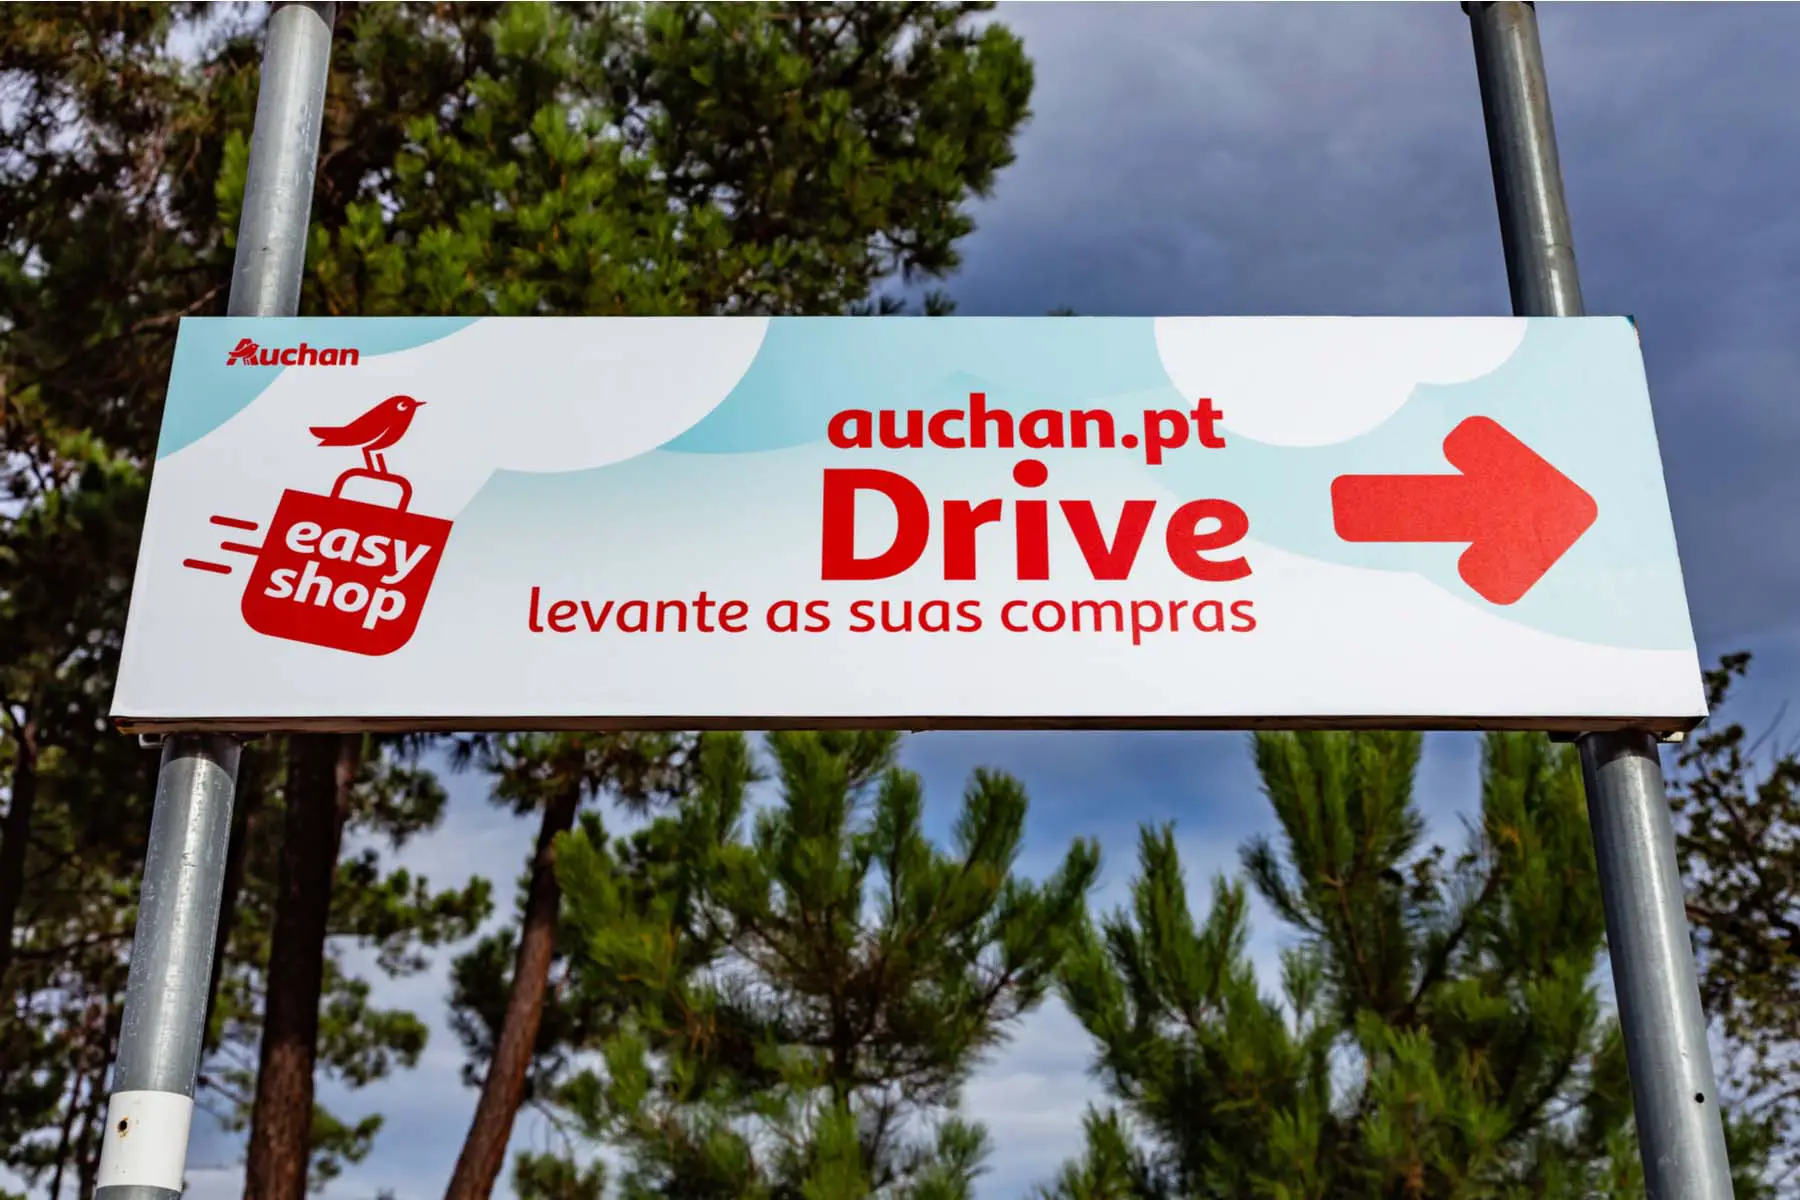 click and collect service at Auchan supermarket